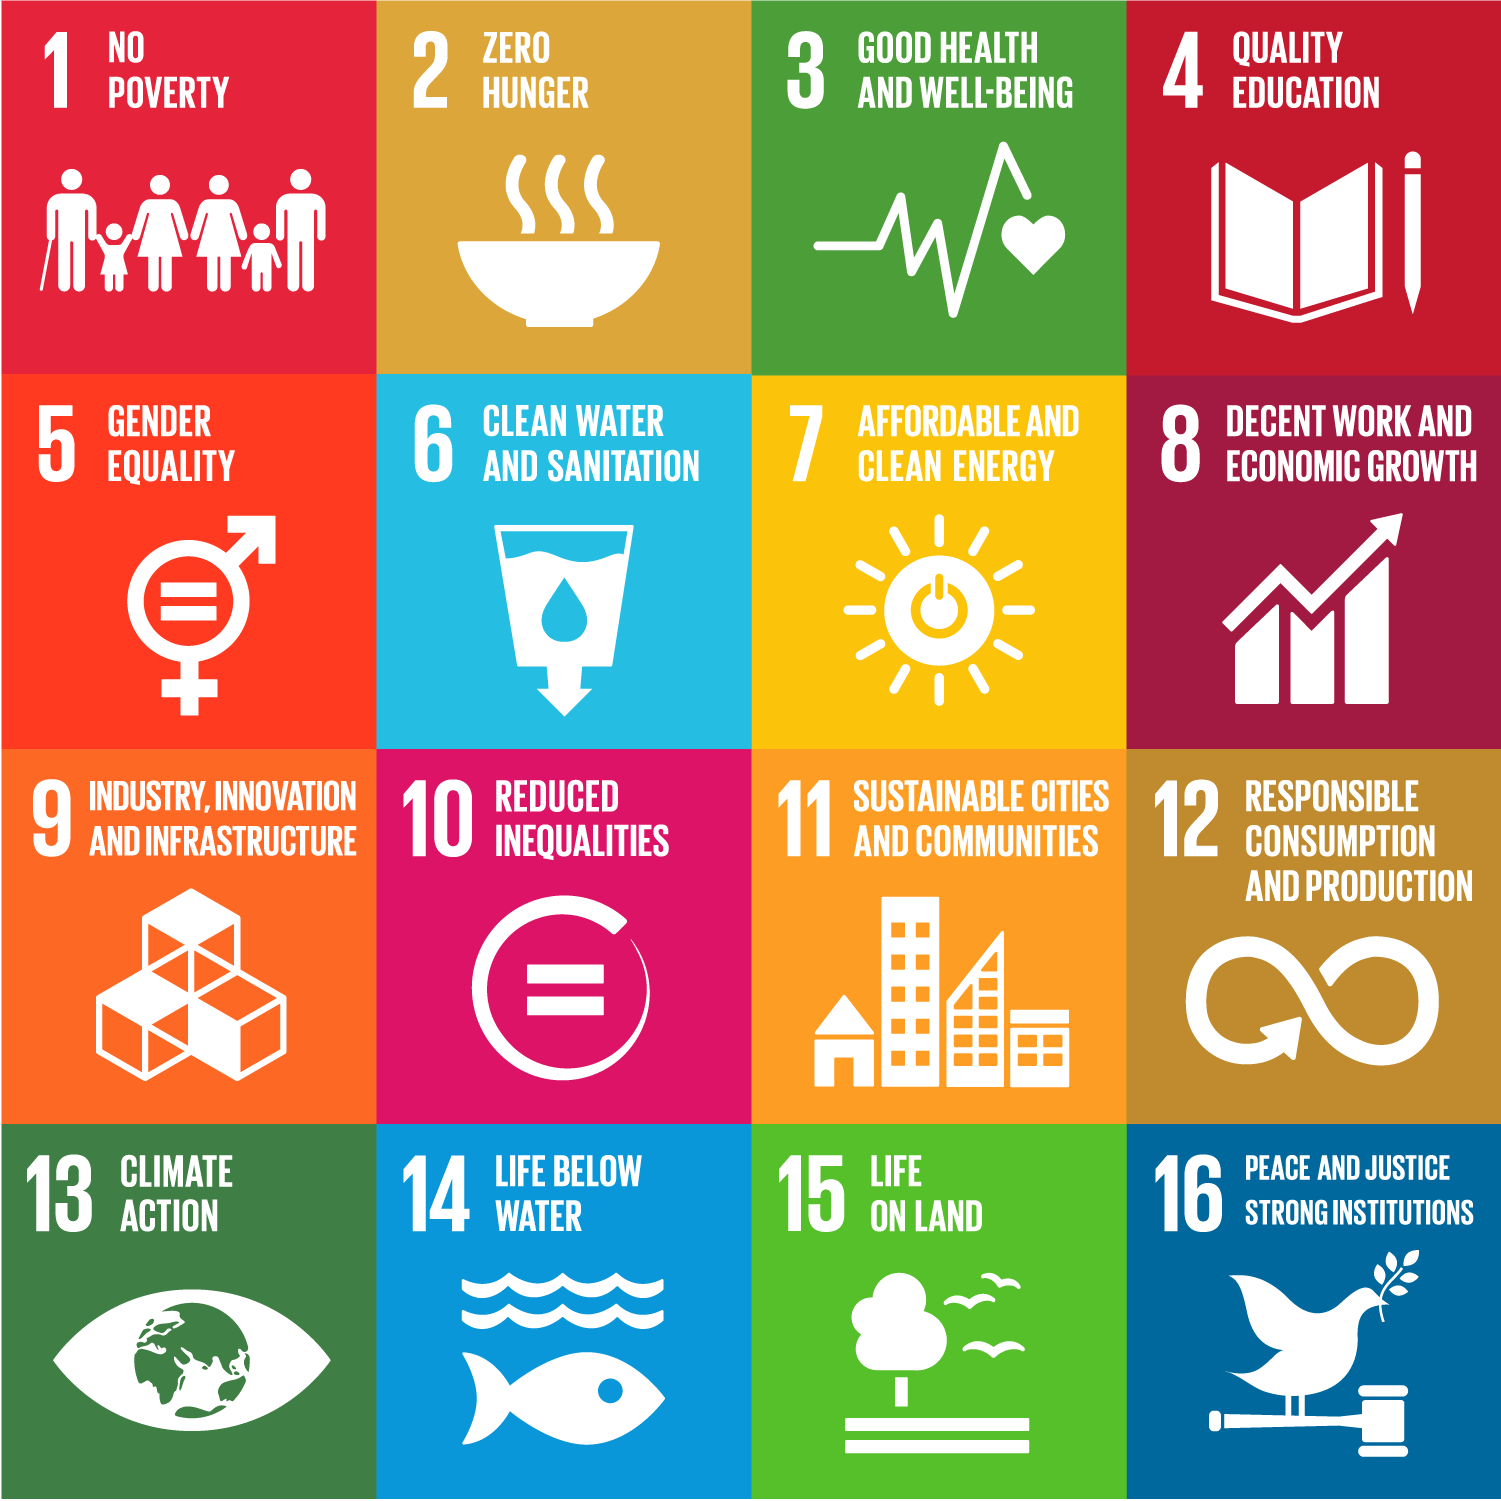 Ethical Financial Advisers Path Financial and The UN Sustainable Development Goals